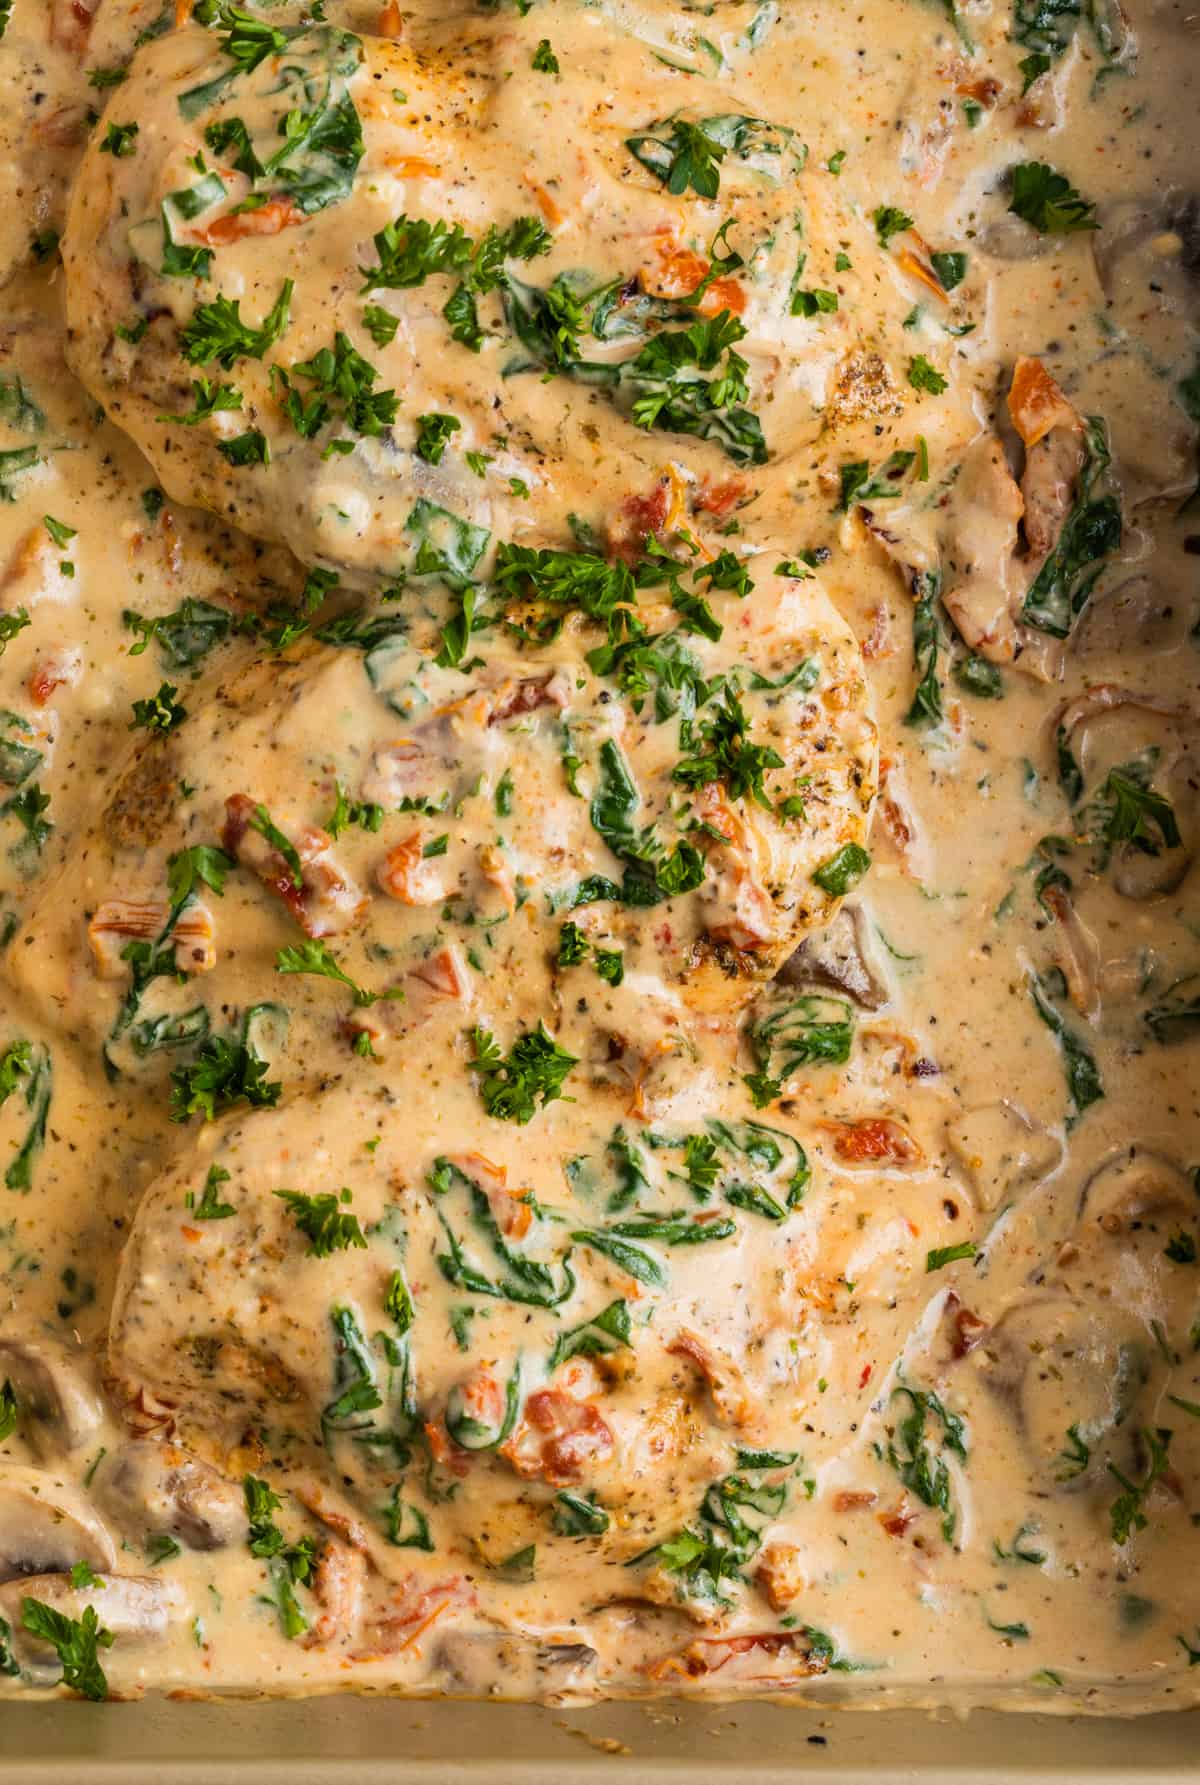 Baked chicken with cream sauce over top with mushrooms, spinach, sun-dried tomatoes, and parsley over top.